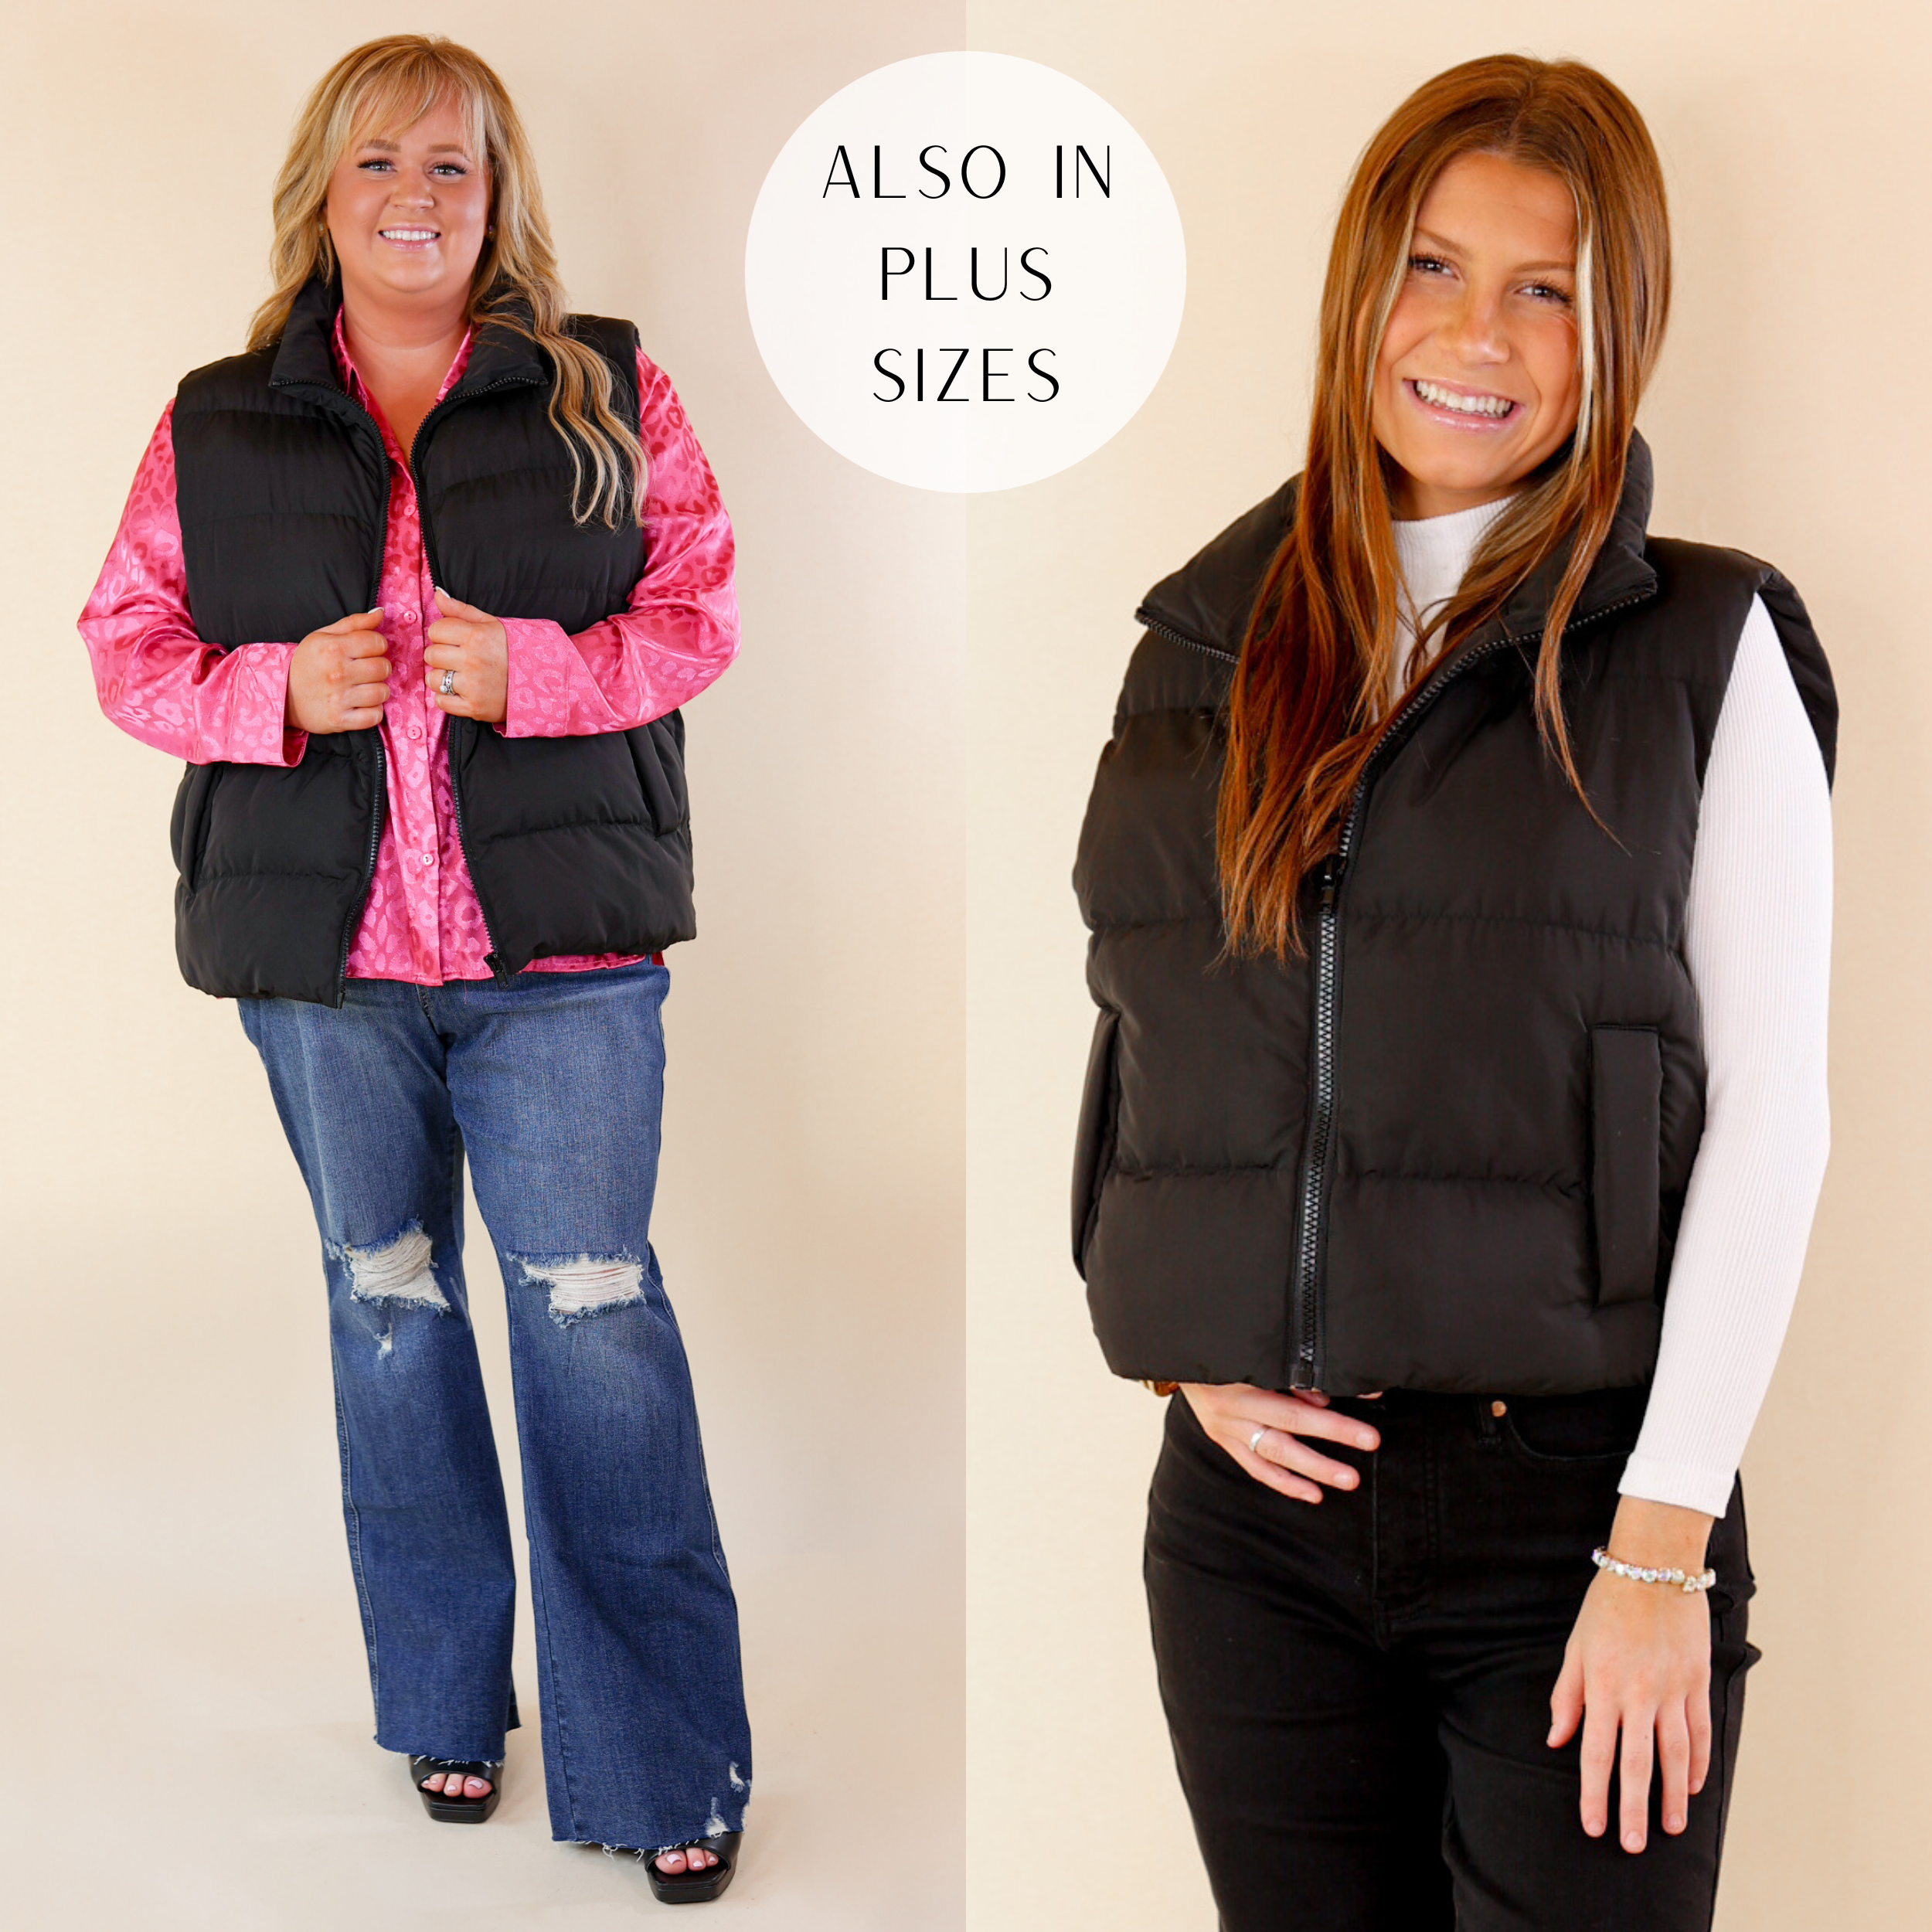 Models are wearing a black zip up puffer vest. Plus size model has it paired with distressed jeans, a pink top, and black heels. Size small model has it paired with a white top, black jeans, and silver jewelry.